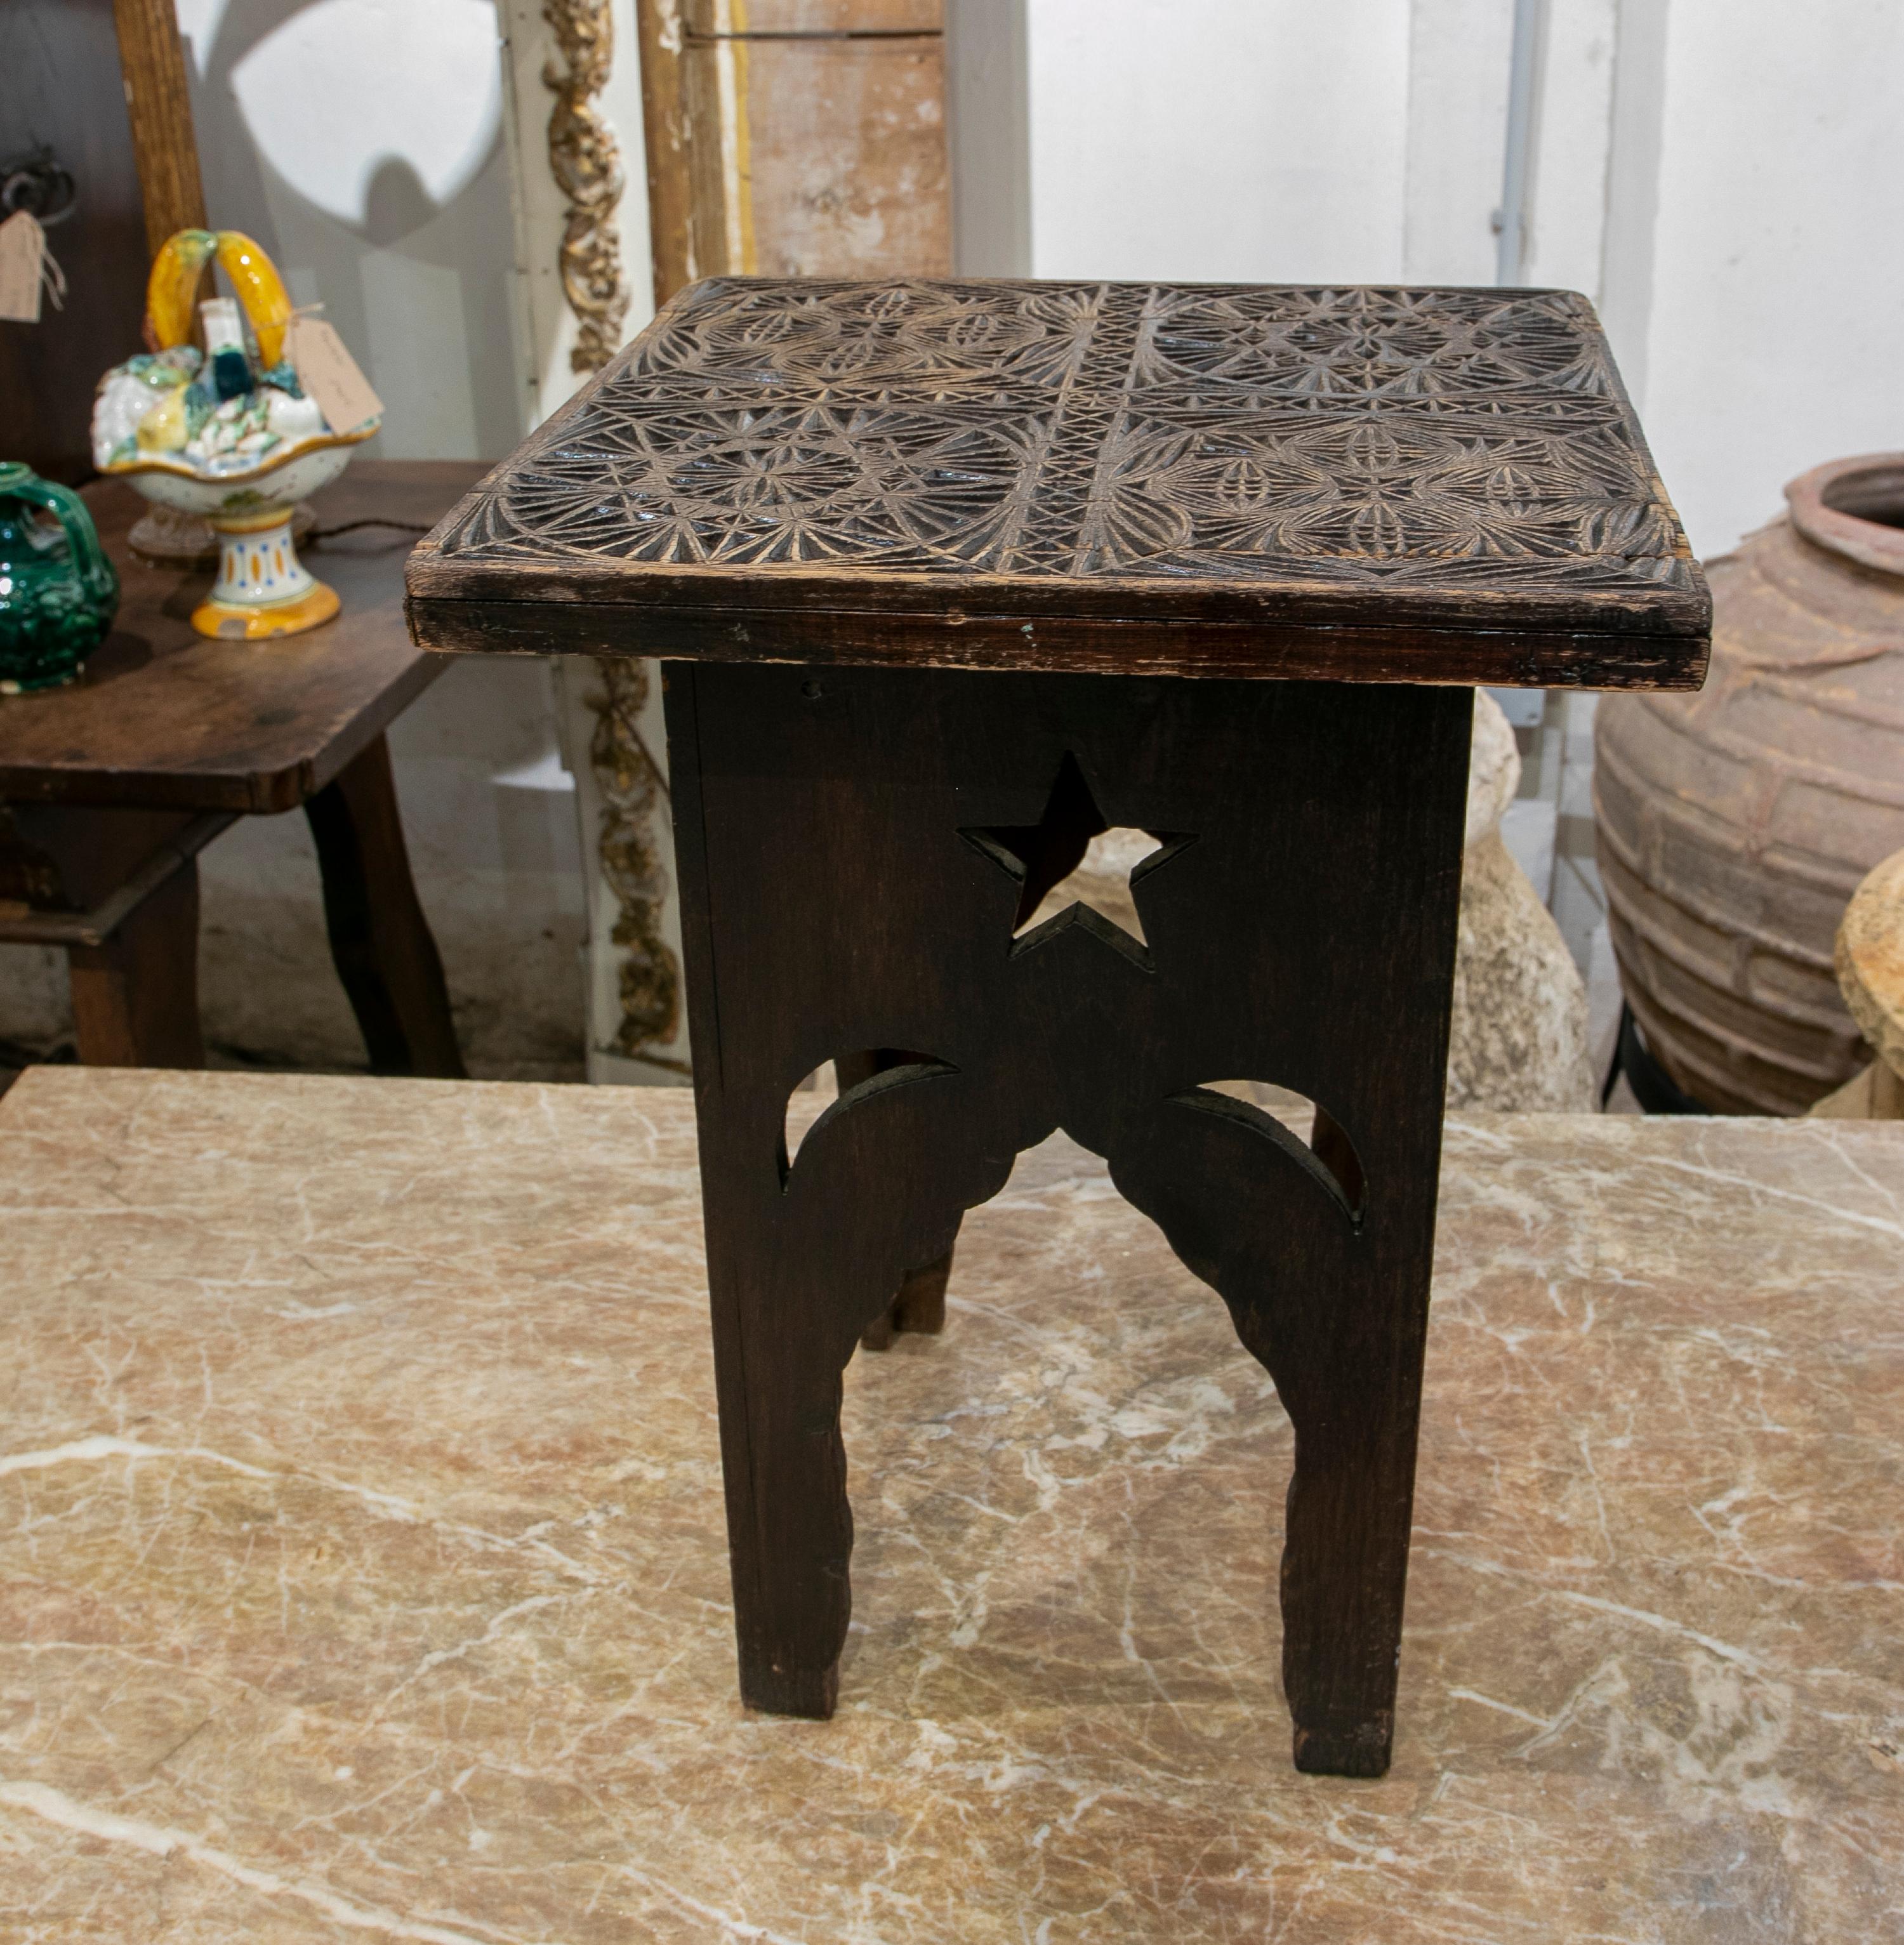 Wooden side table with hand-carved top with moulds for making fabrics.